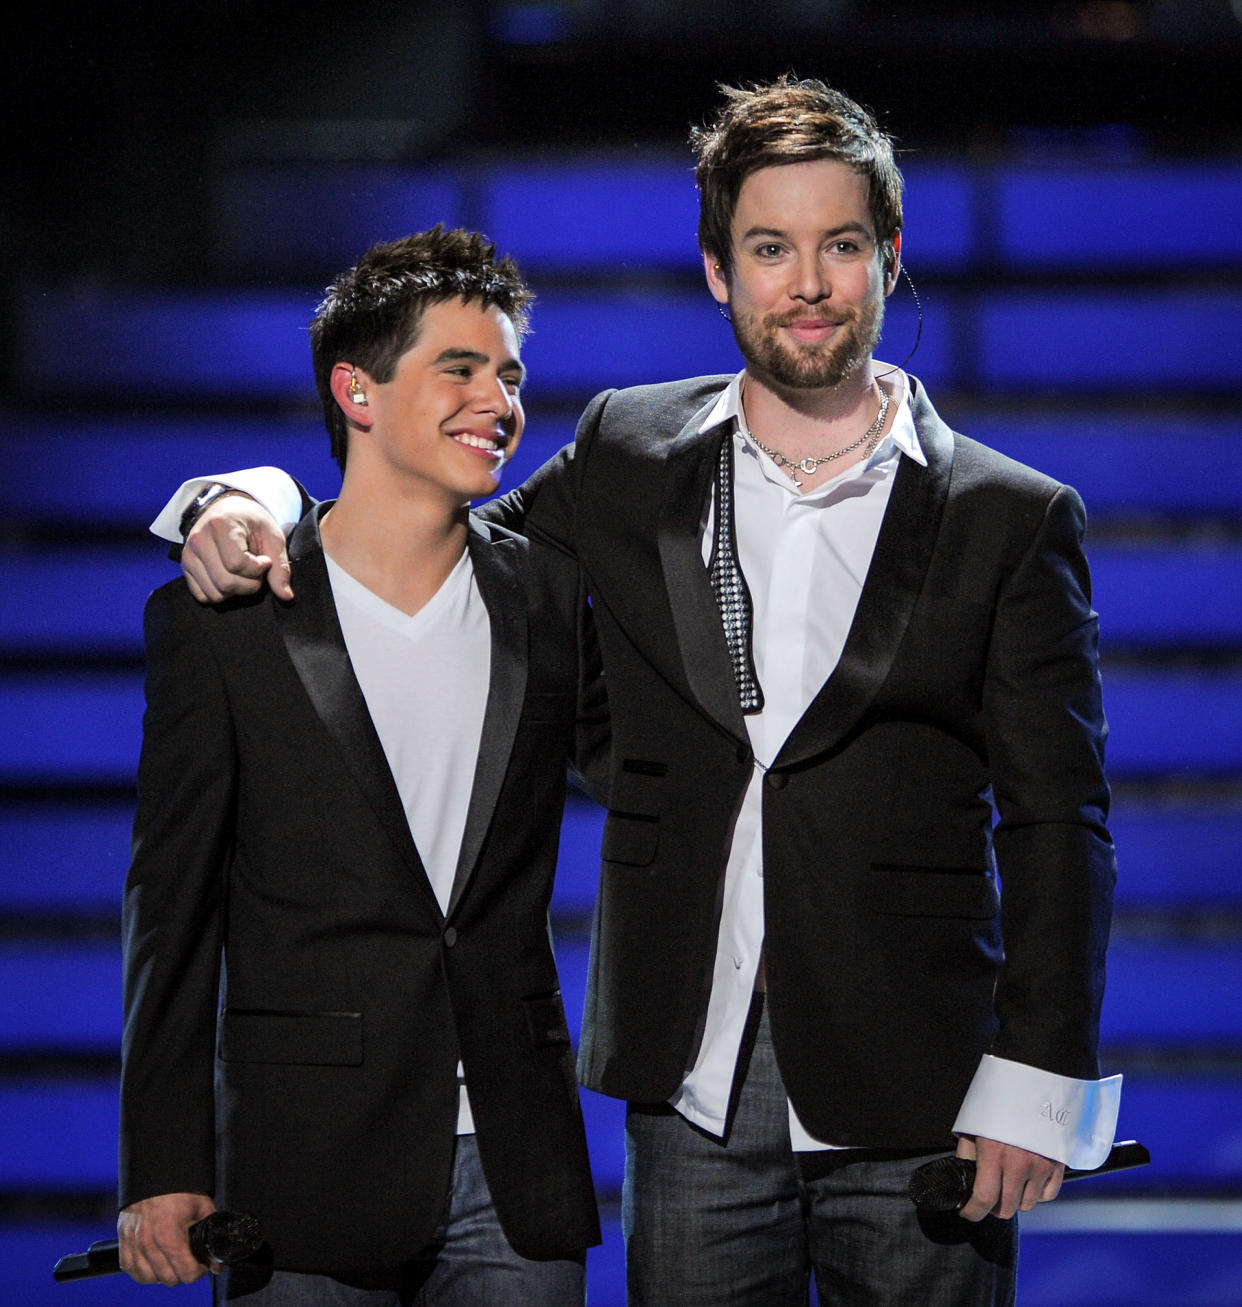 Finalists David Archuleta and David Cook on stage at the American Idol Season 7 Grand Finale on May 21, 2008 at the Nokia Theatre in Los Angeles. (M. Caulfield / WireImage file)